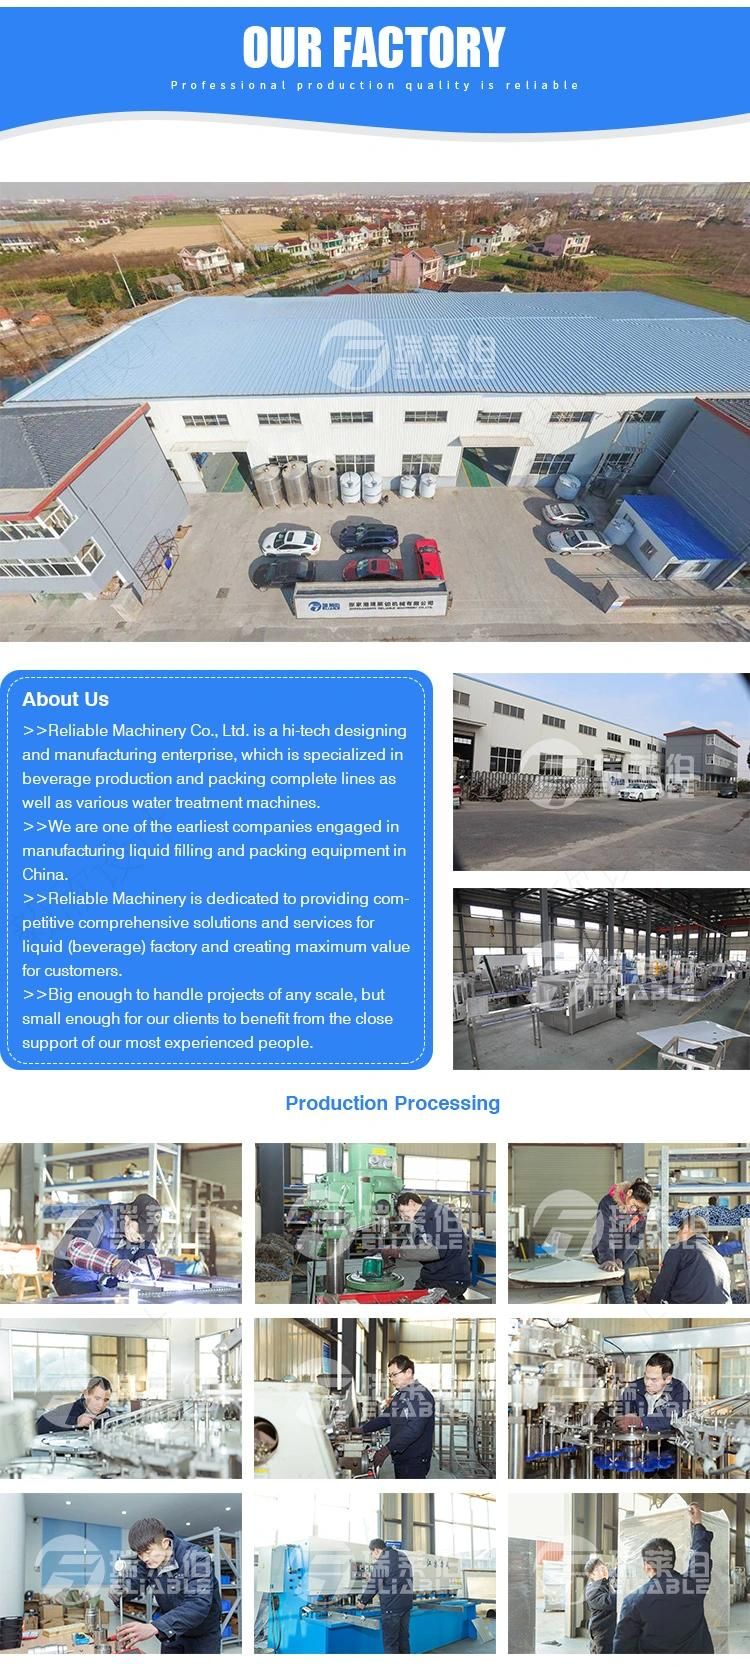 Energy Saving Blow Moulding Price Fully Automatic Blowing Pet Bottle Molding Machine